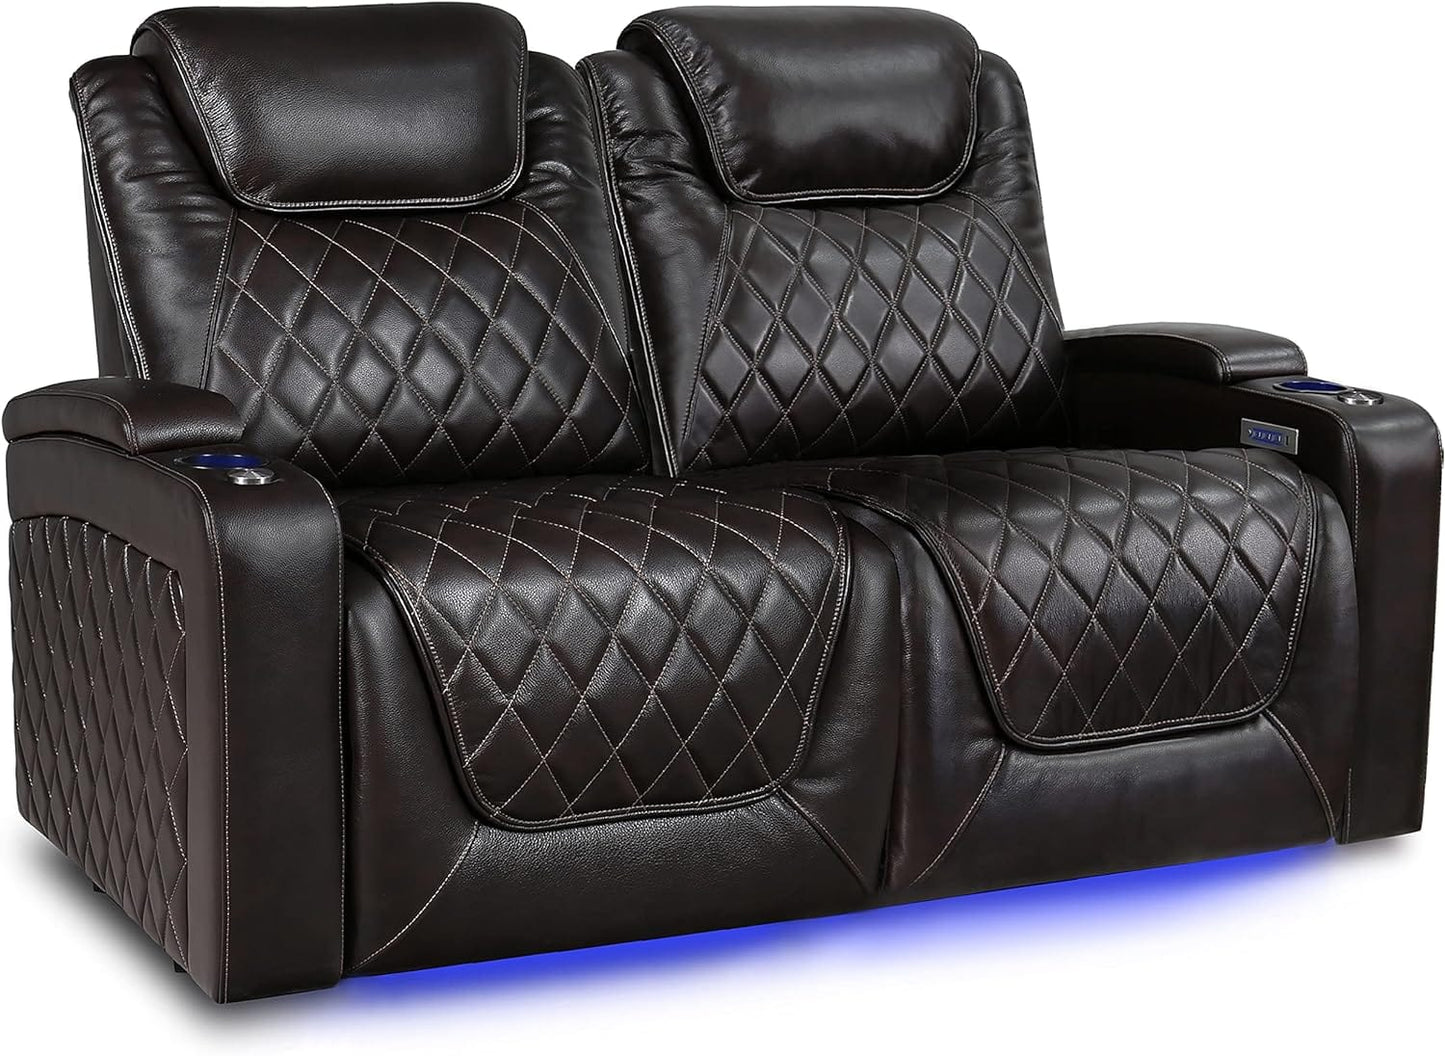 by Valencia Seating Sofa Row of 2 - Loveseat | Width: 65" Height: 45" Depth: 38" / Dark Chocolate / Regular Spec (300 LBs Sitting Weight Limit) Valencia Oslo XL Home Theater Seating